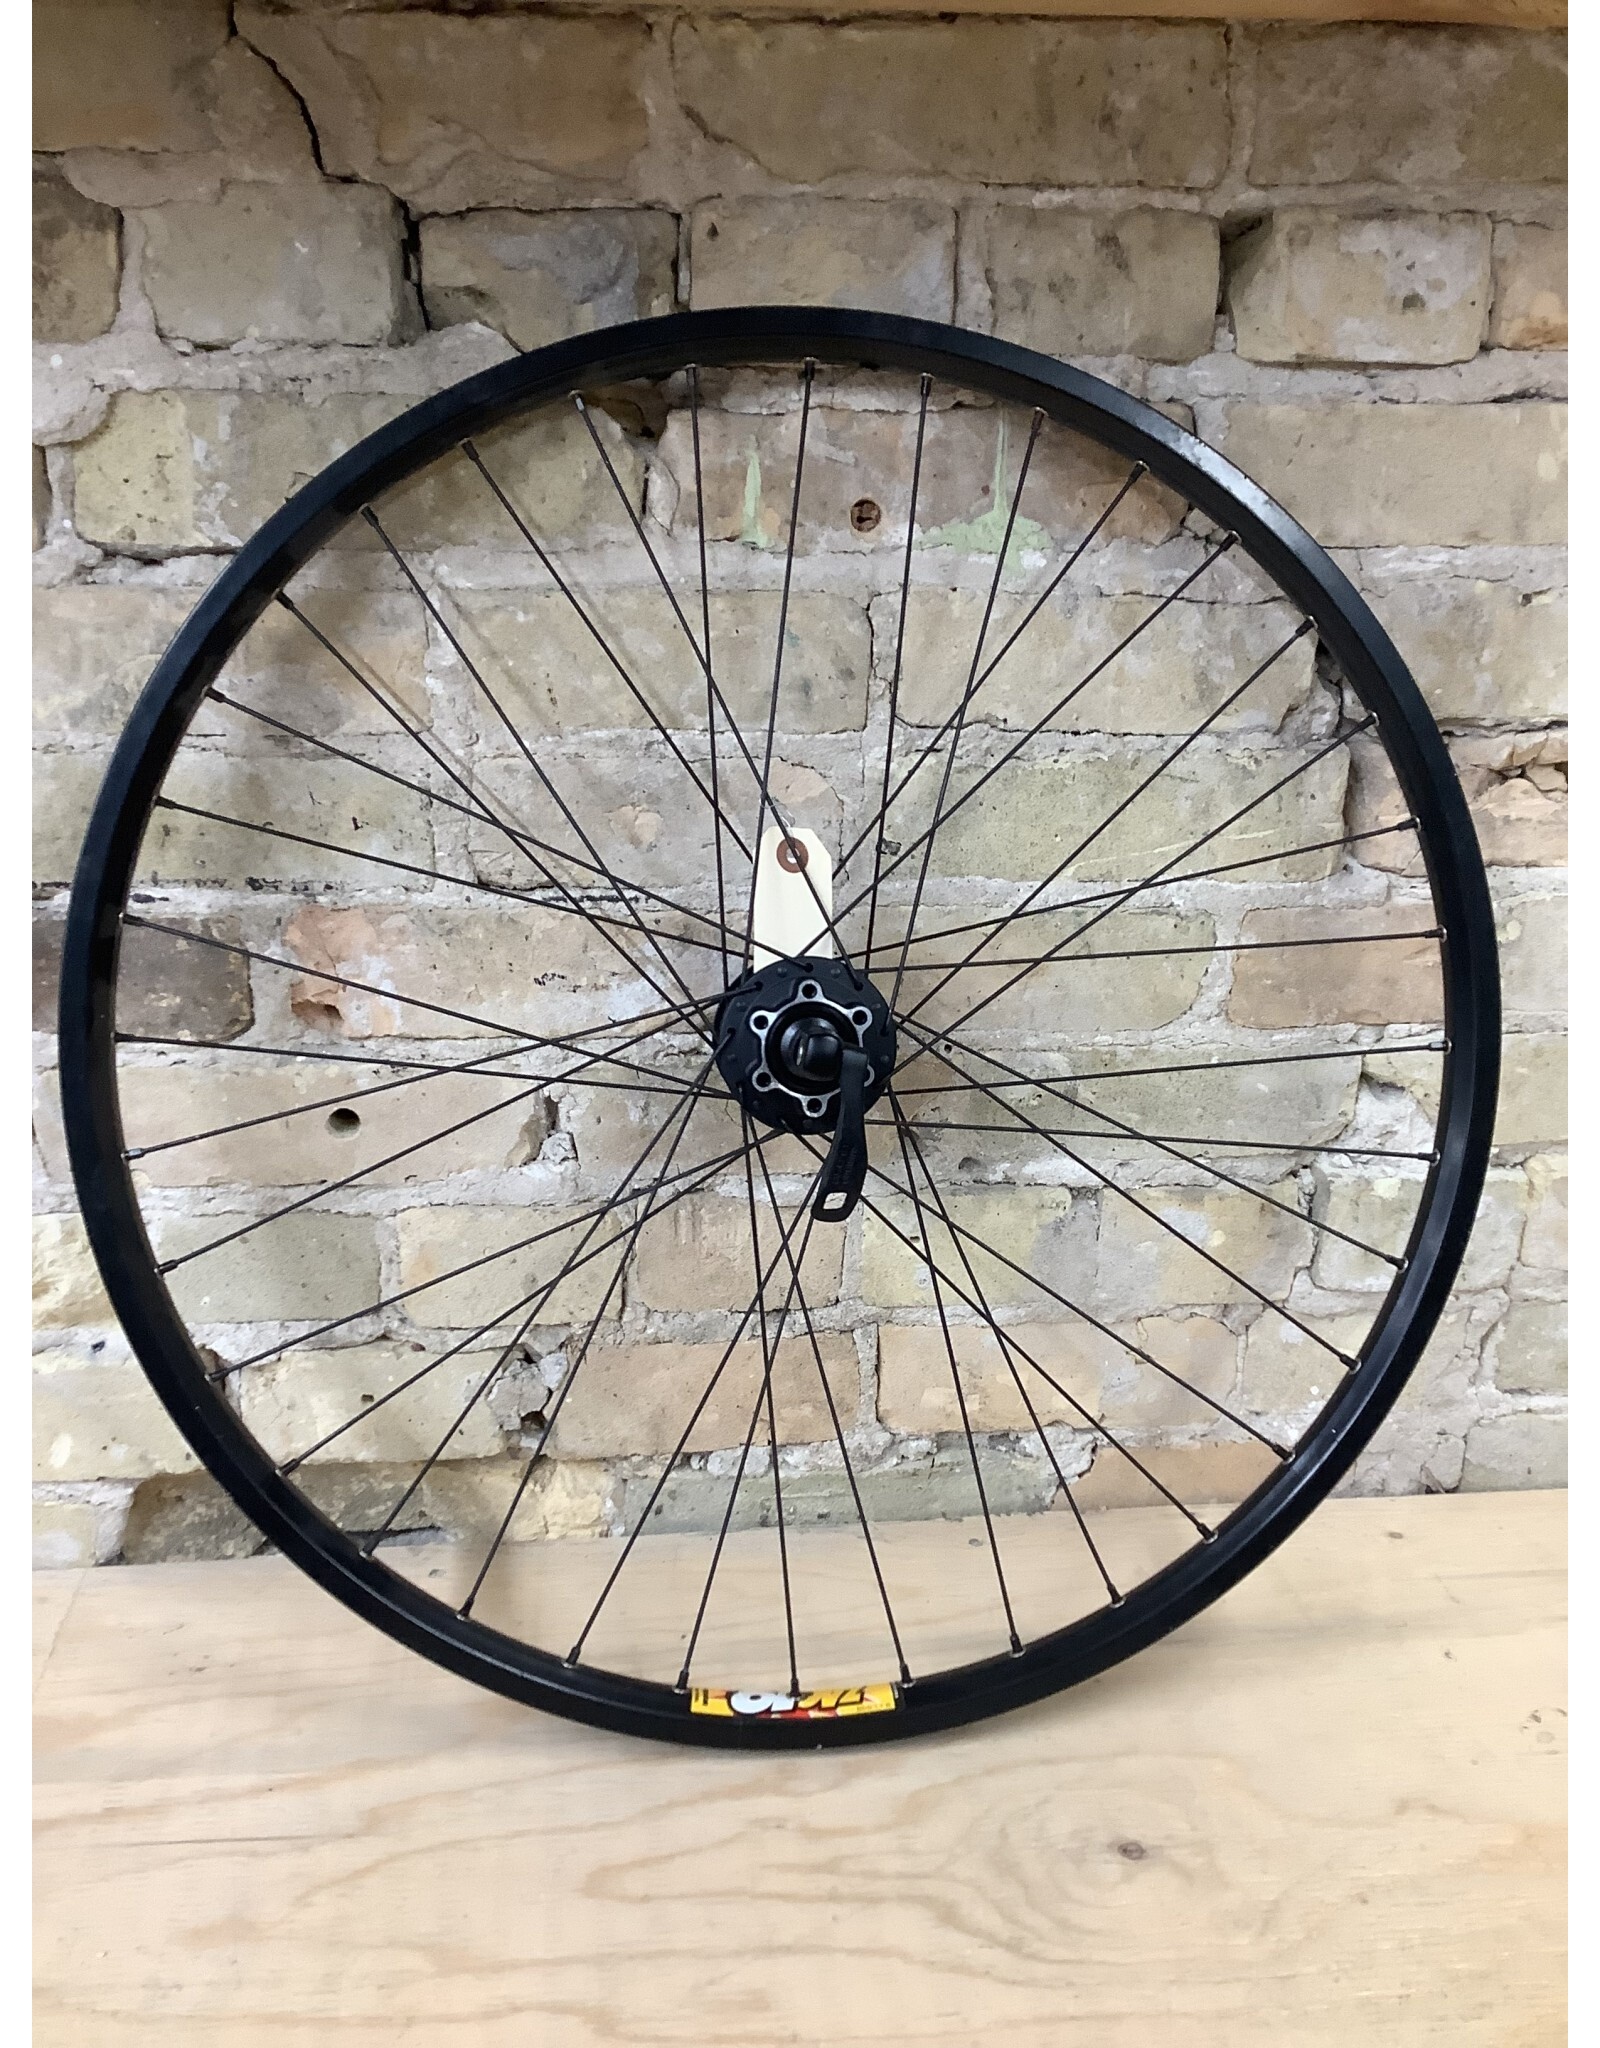 Natural Cycleworks HandBuilt Wheel 26" - ZAC19 - Black Butted Spokes Deore Disc Front